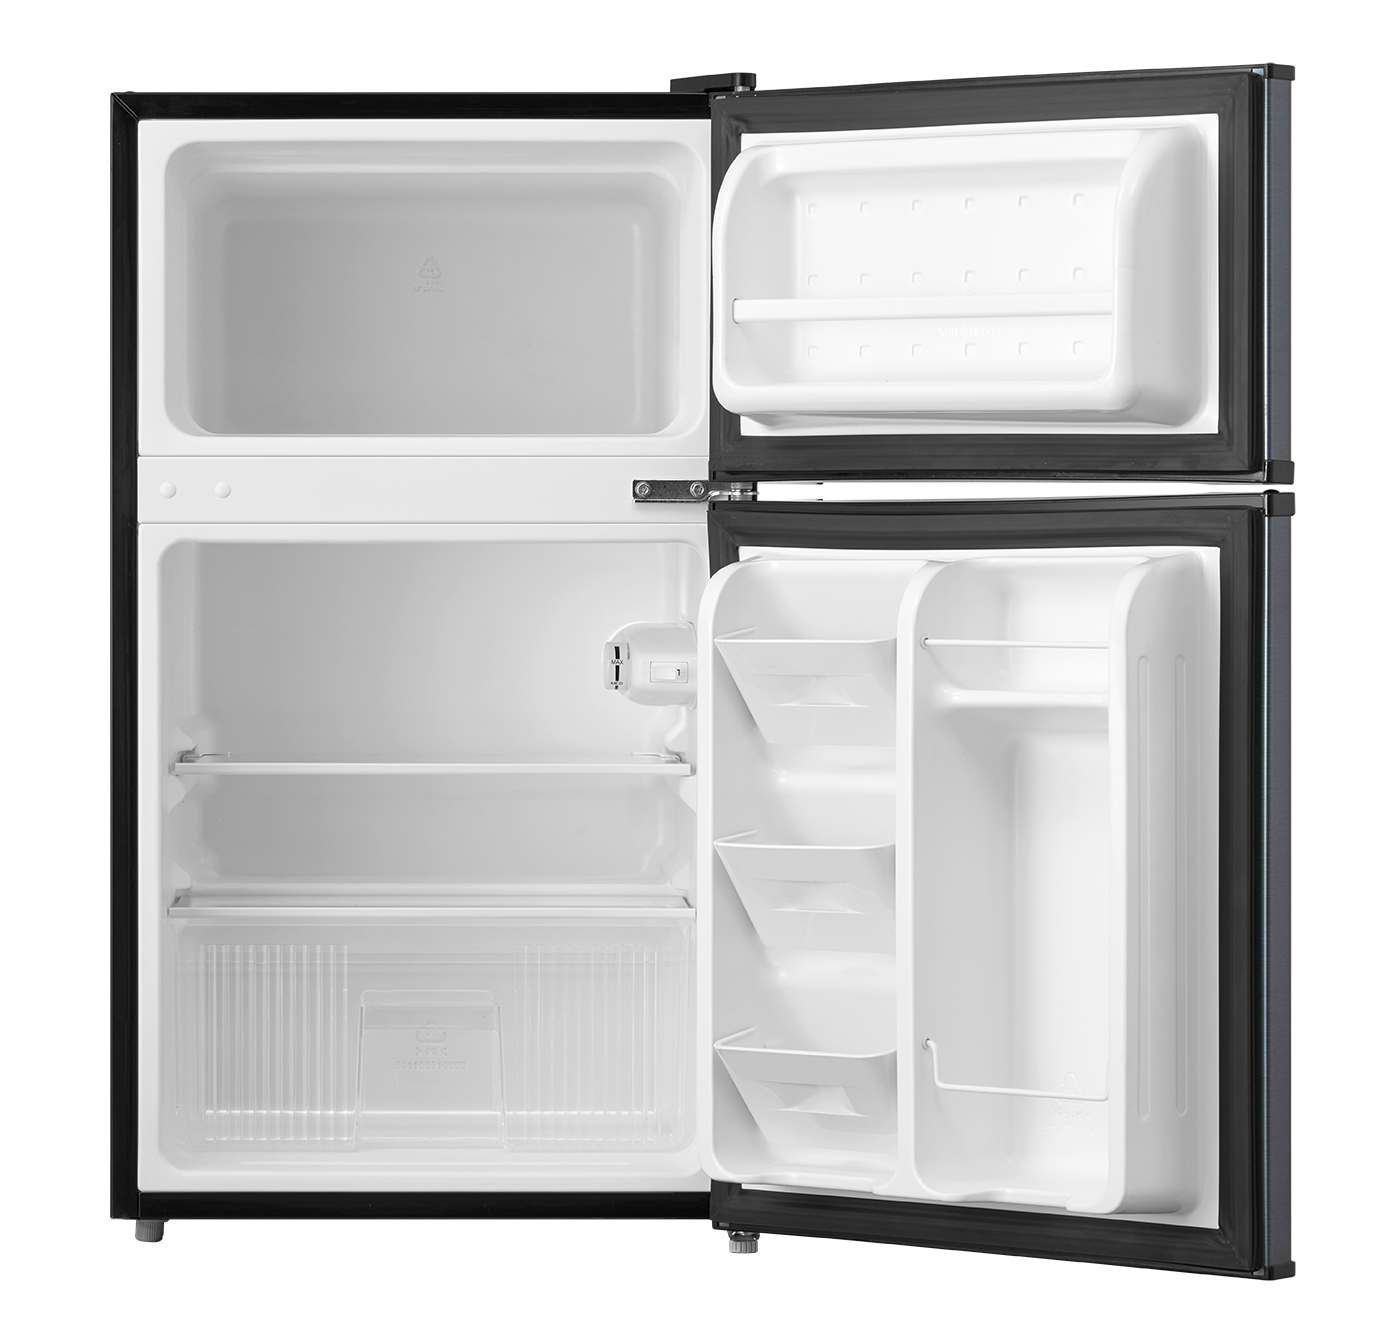 Arctic King 3.2 Cu ft Two Door Compact Refrigerator with Freezer, Black Stainless Steel look - image 5 of 18